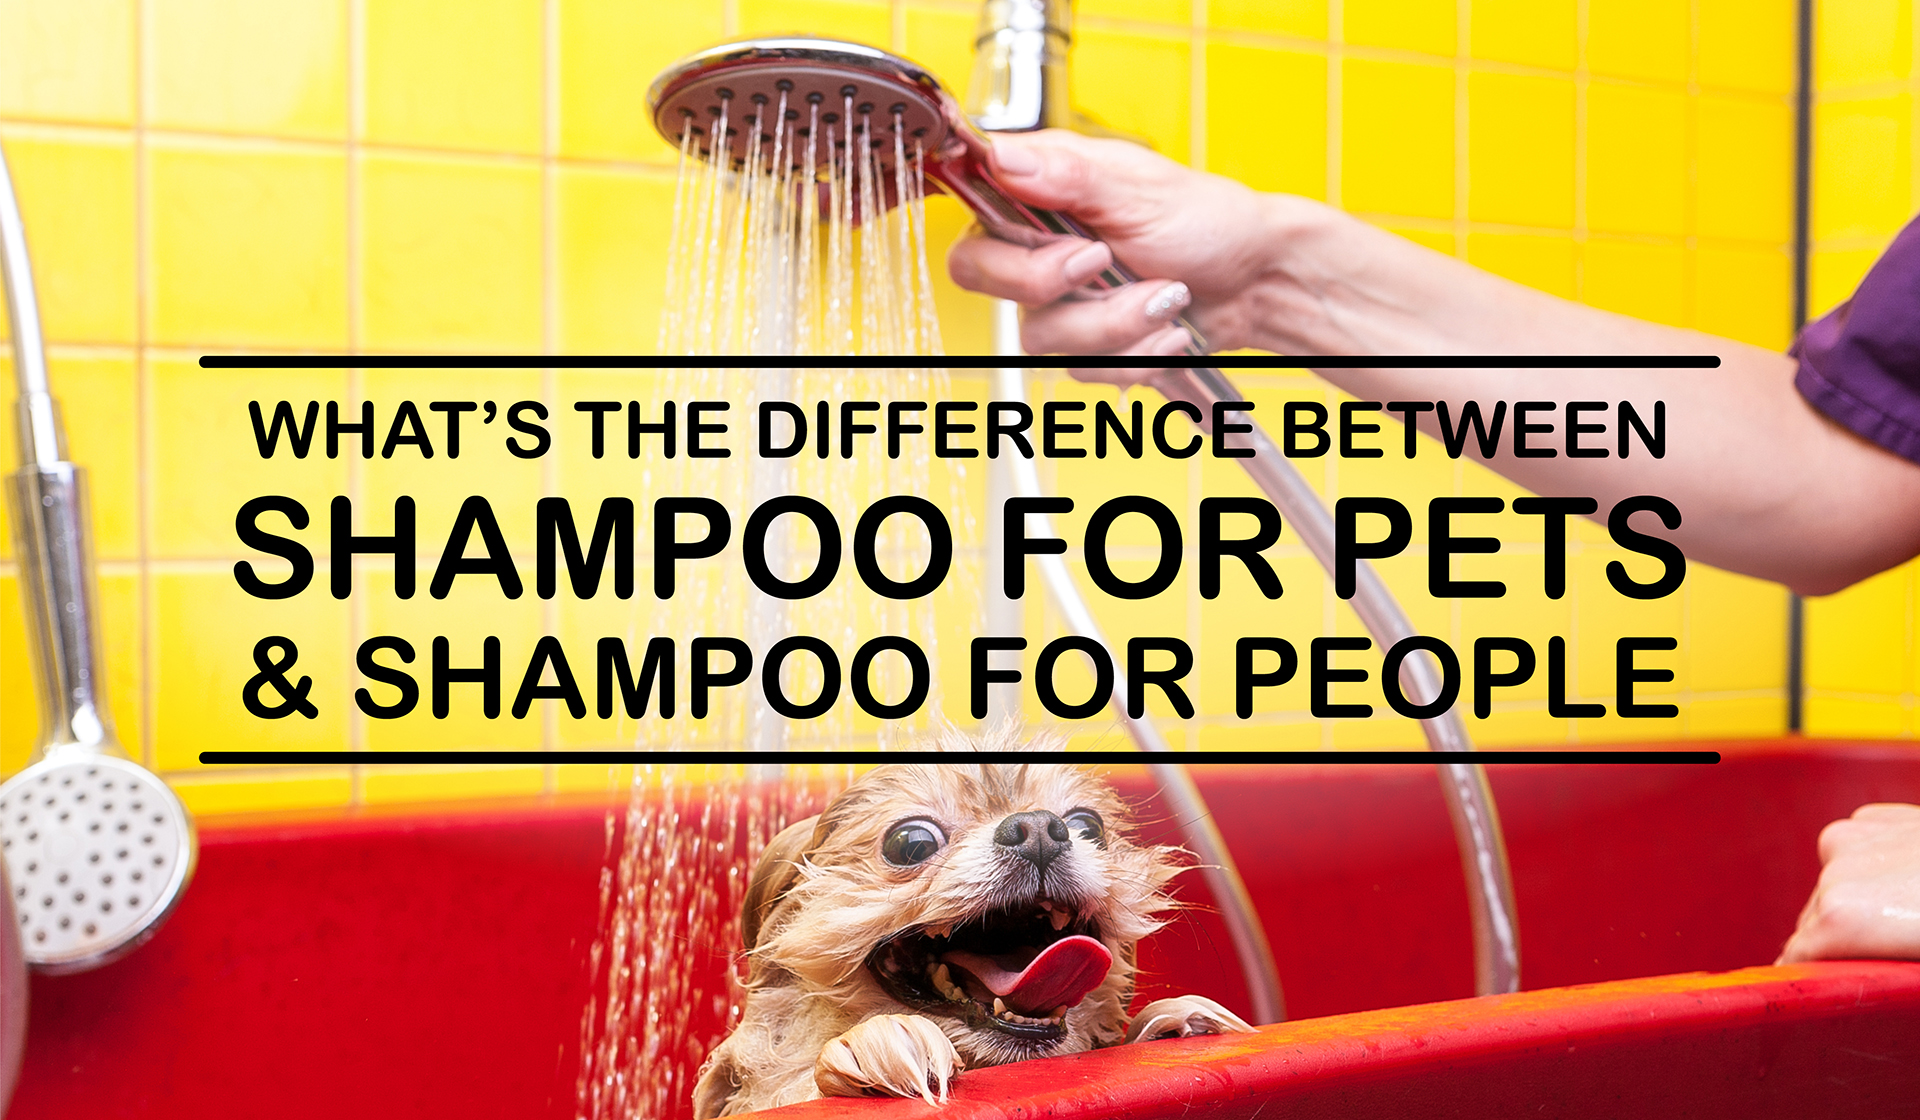 What’s the Difference Between Shampoo for Pets and Shampoo for People?